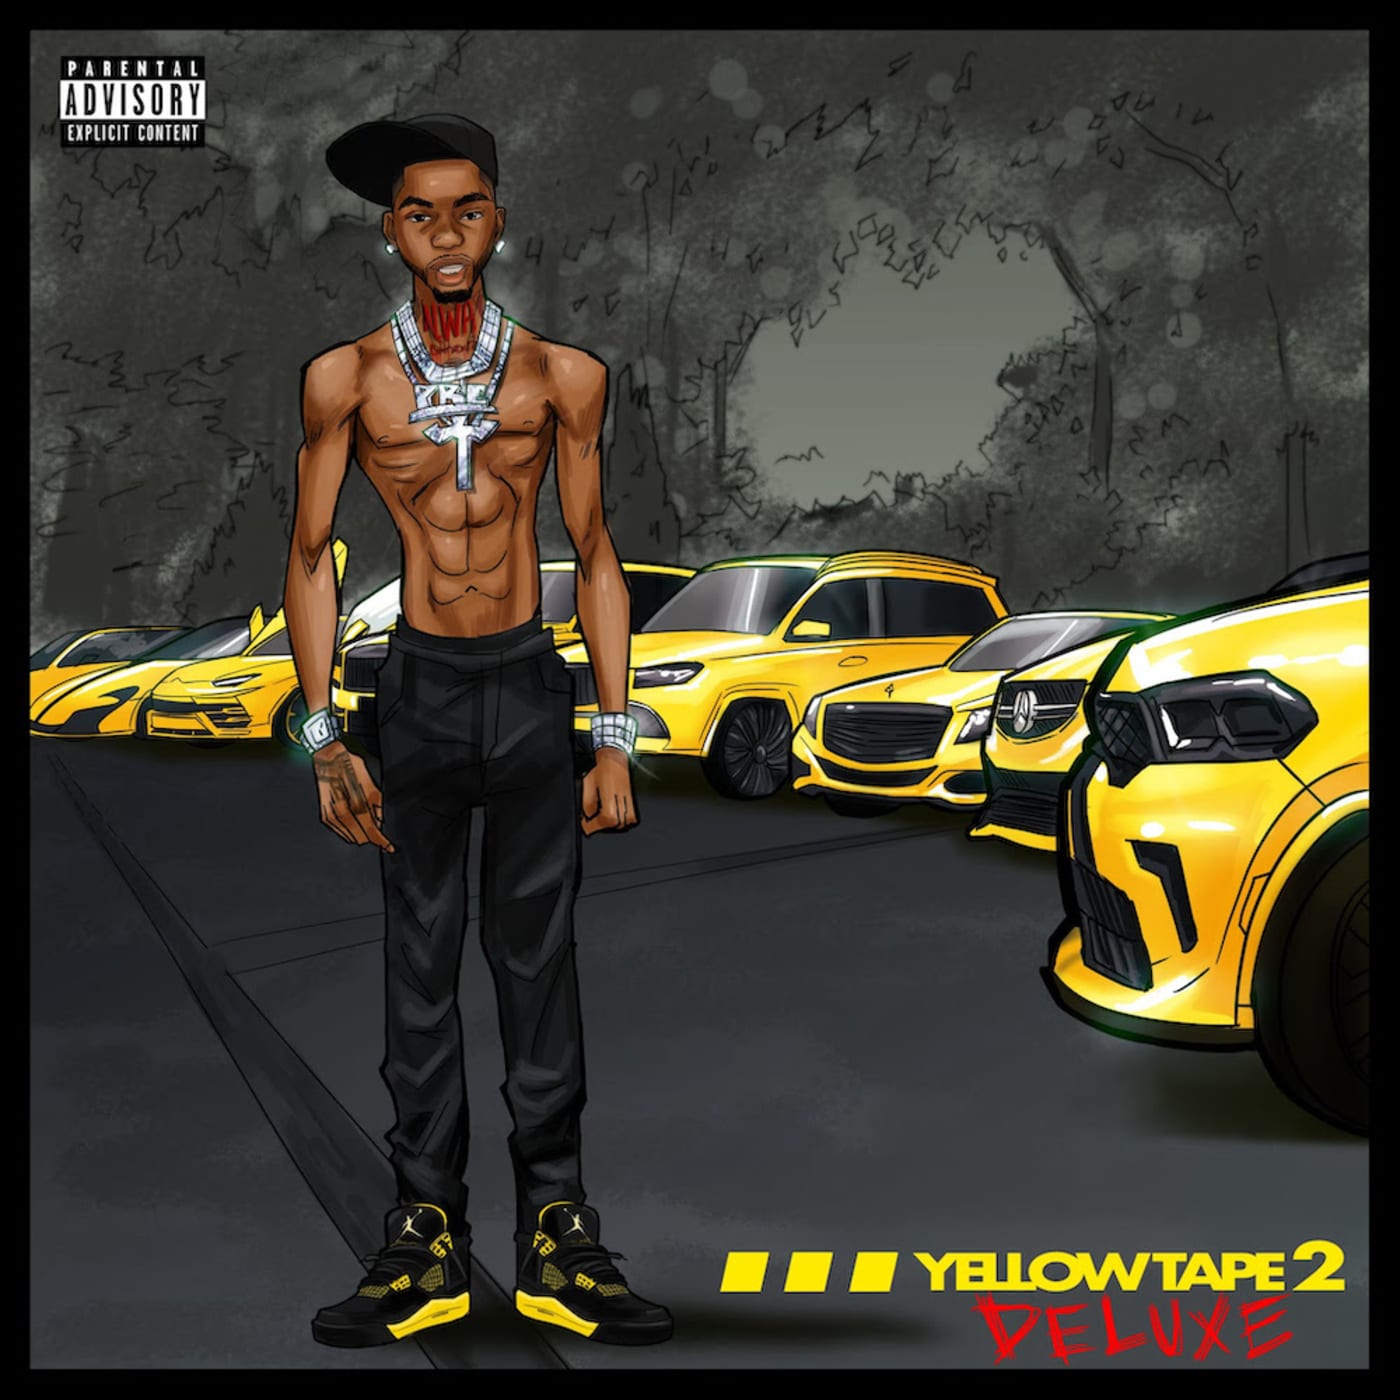 Cover art of Yellow Tape 2 deluxe